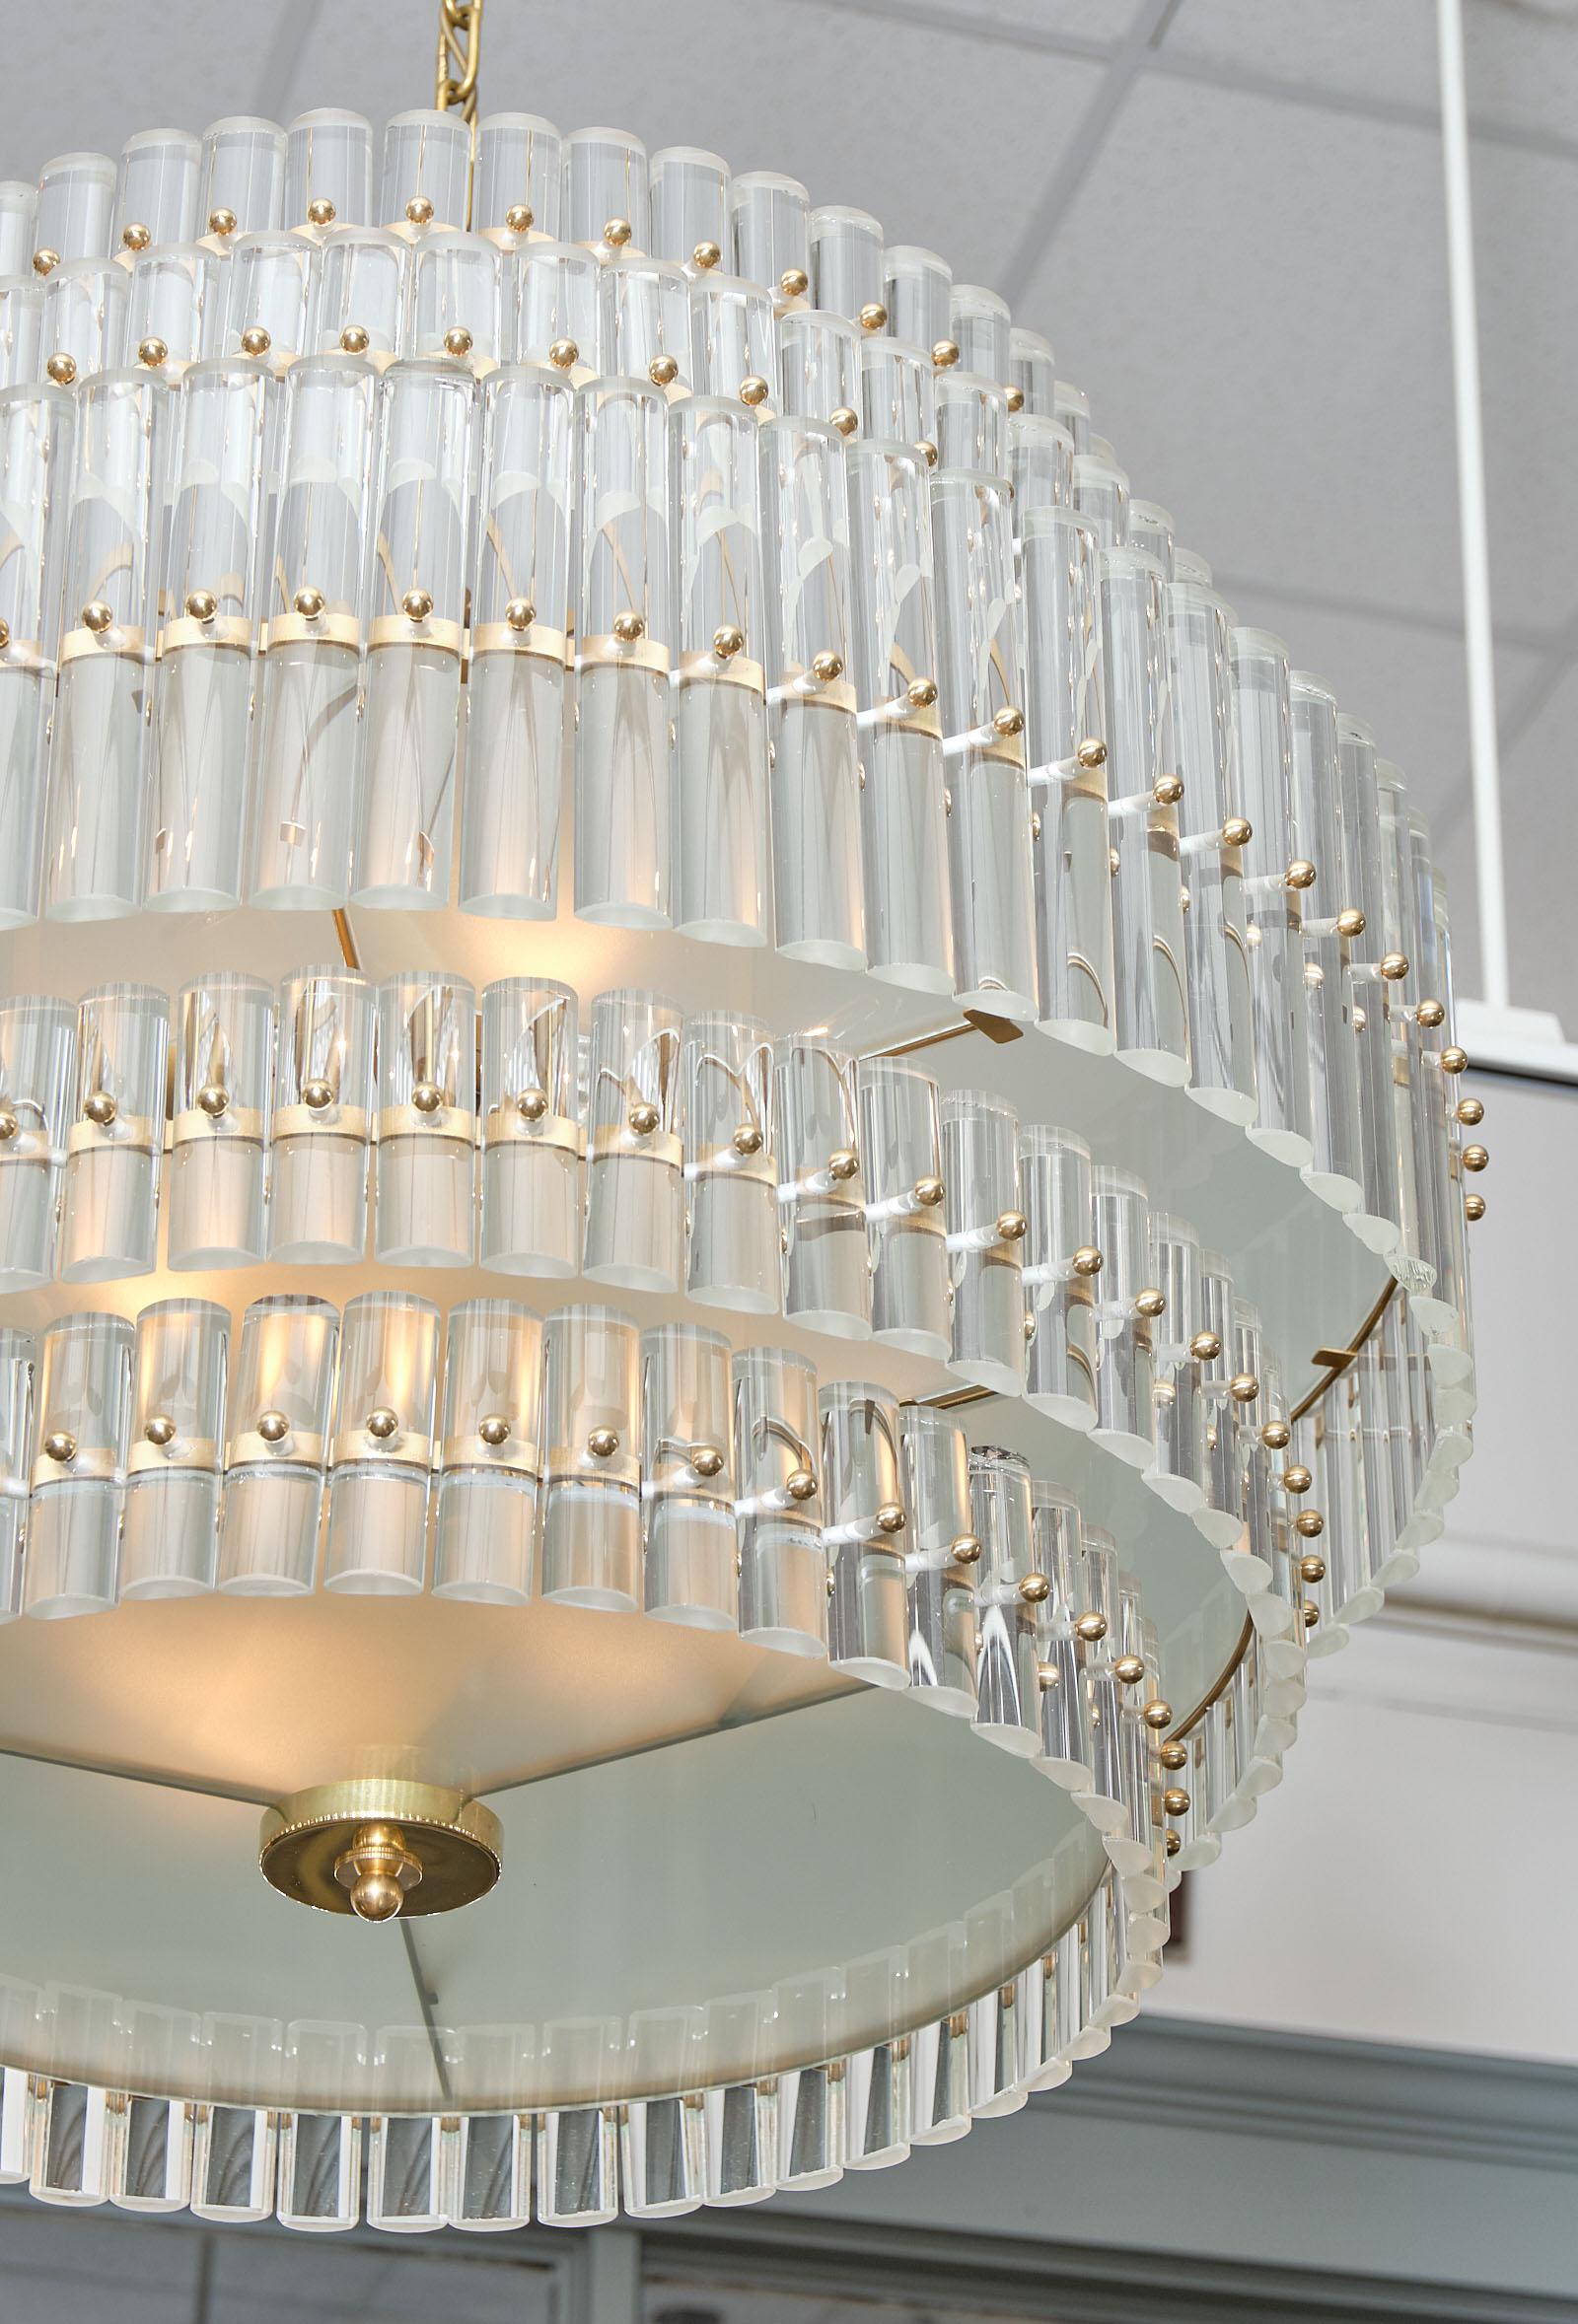 Murano glass tiered rod chandelier from the island of Murano in Italy. This piece features a gilt brass structure supporting five rows of clear glass rods hand blown by artisans in Murano. We love the glamorous way the light filters through the